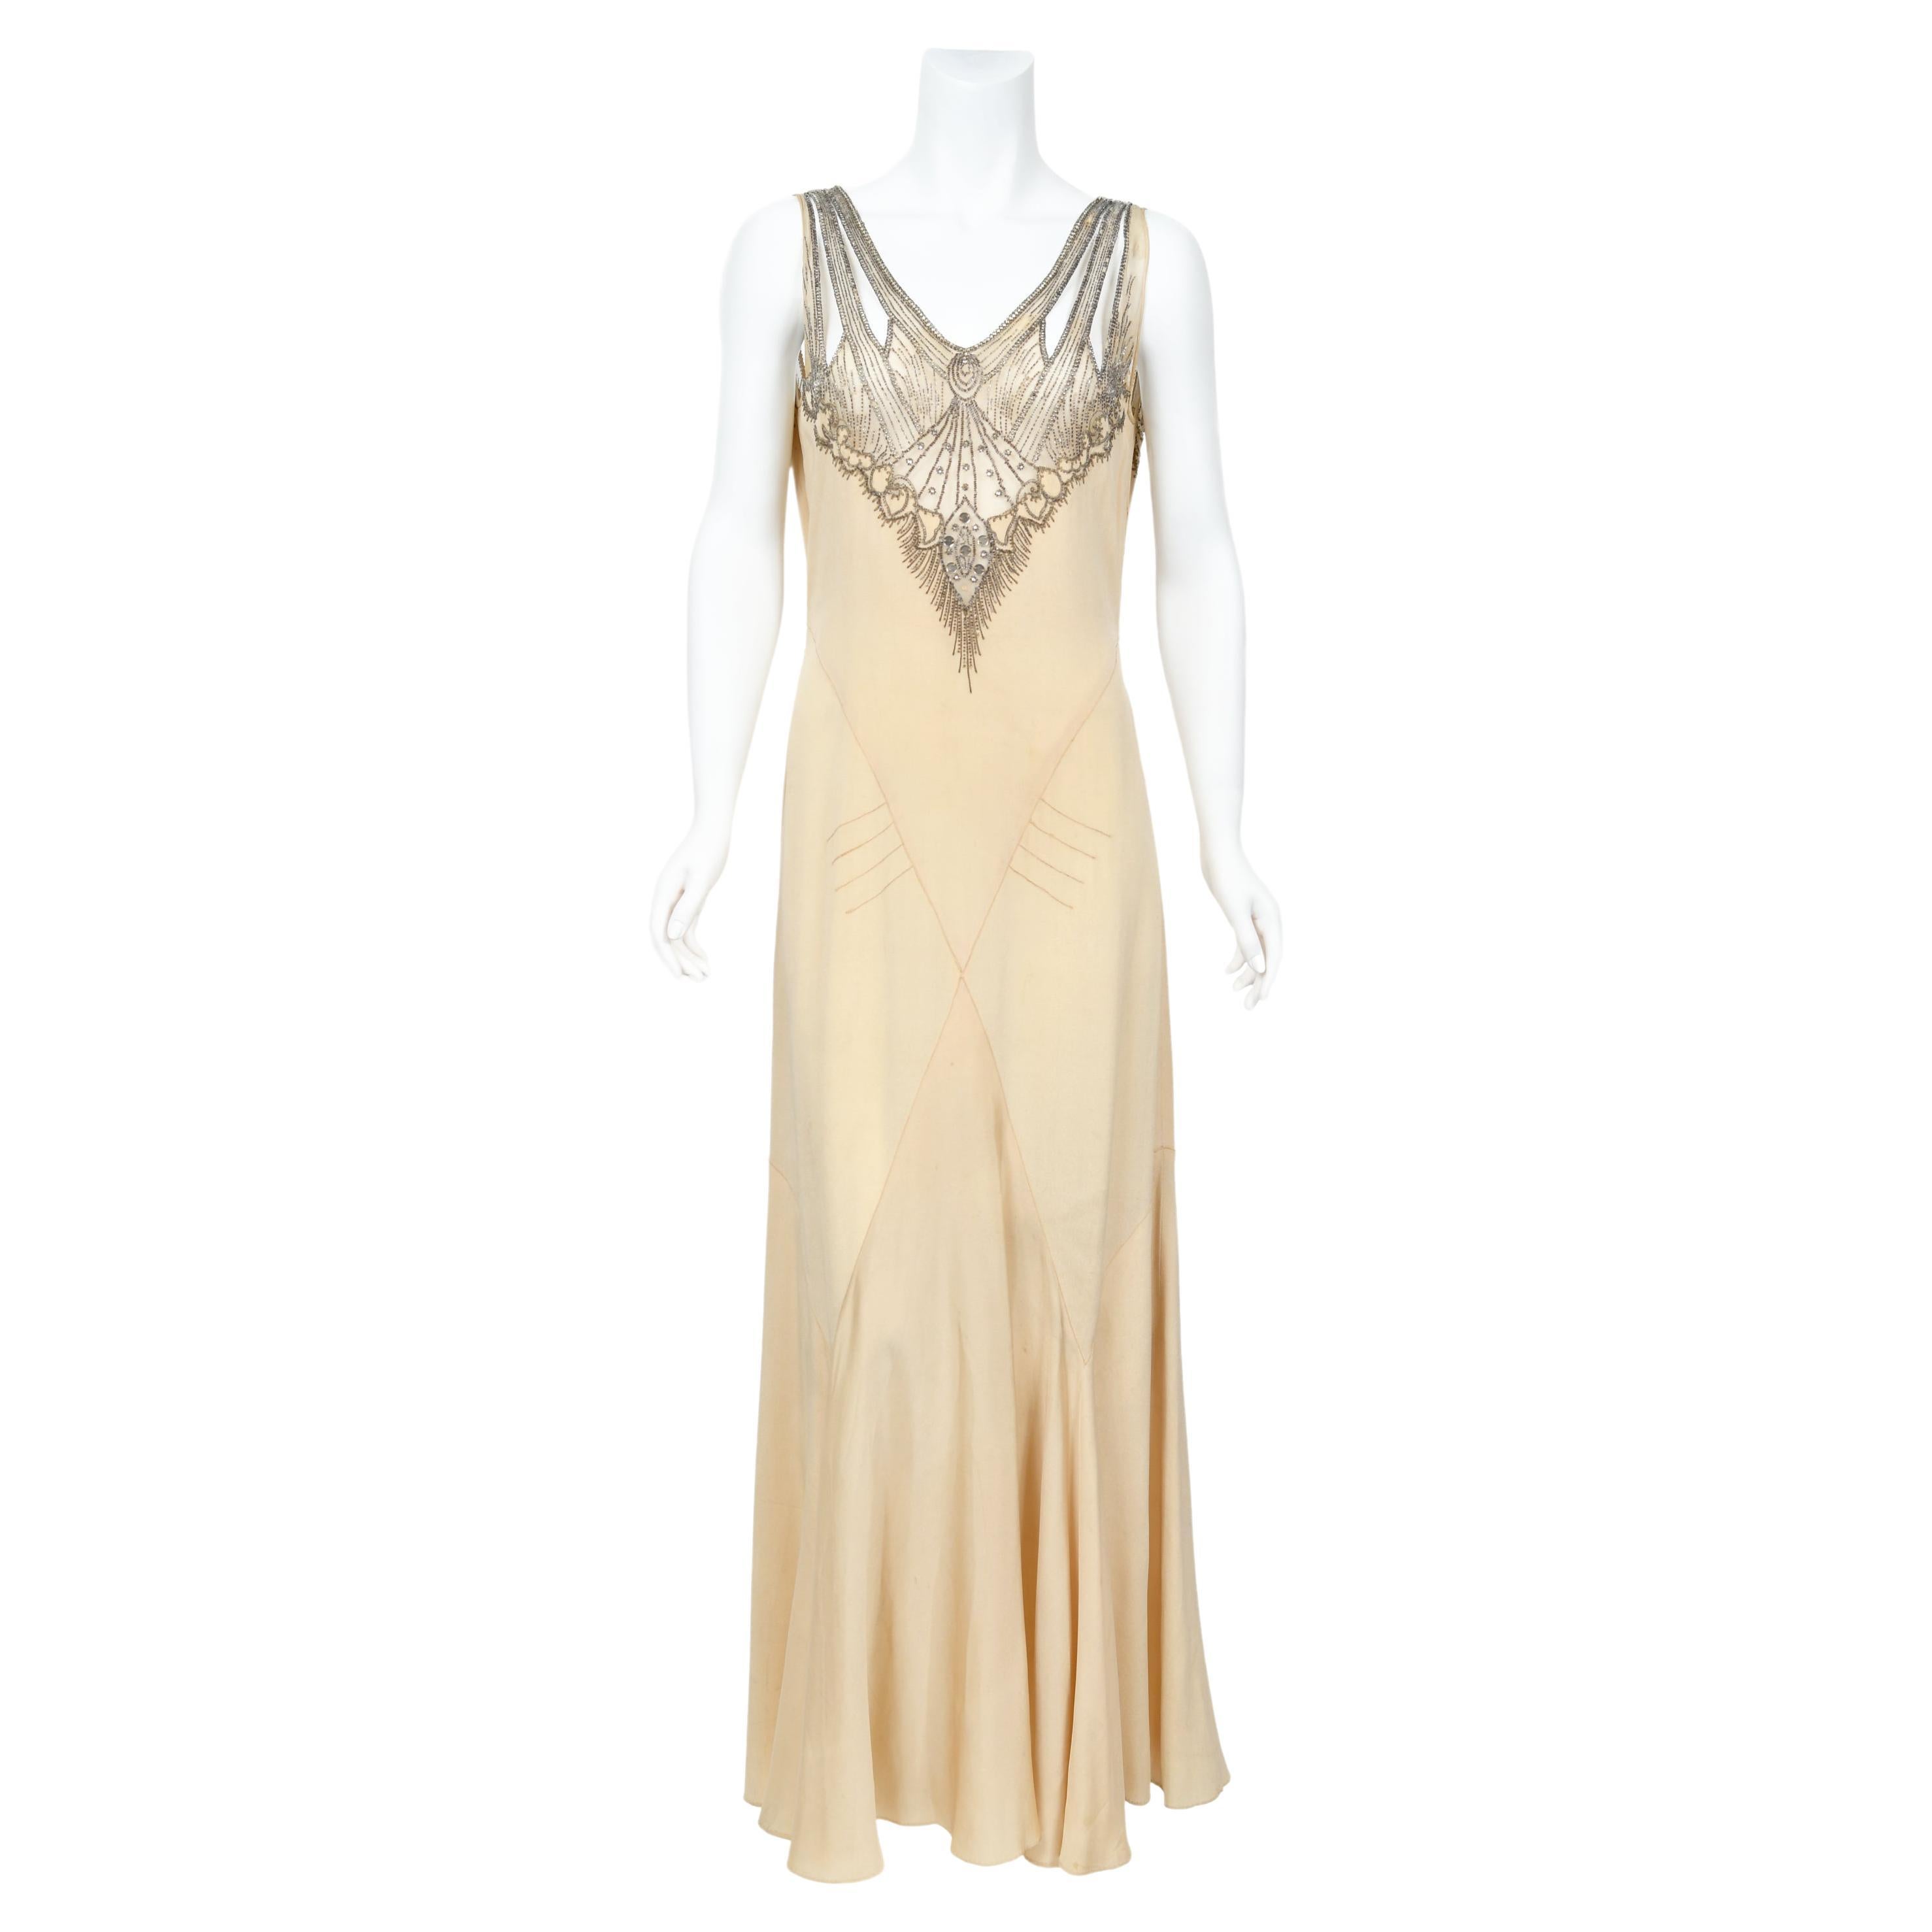 1930's French Ivory Creme Silk Beaded Sheer Illusion Deco Bias-Cut Bridal Gown   For Sale